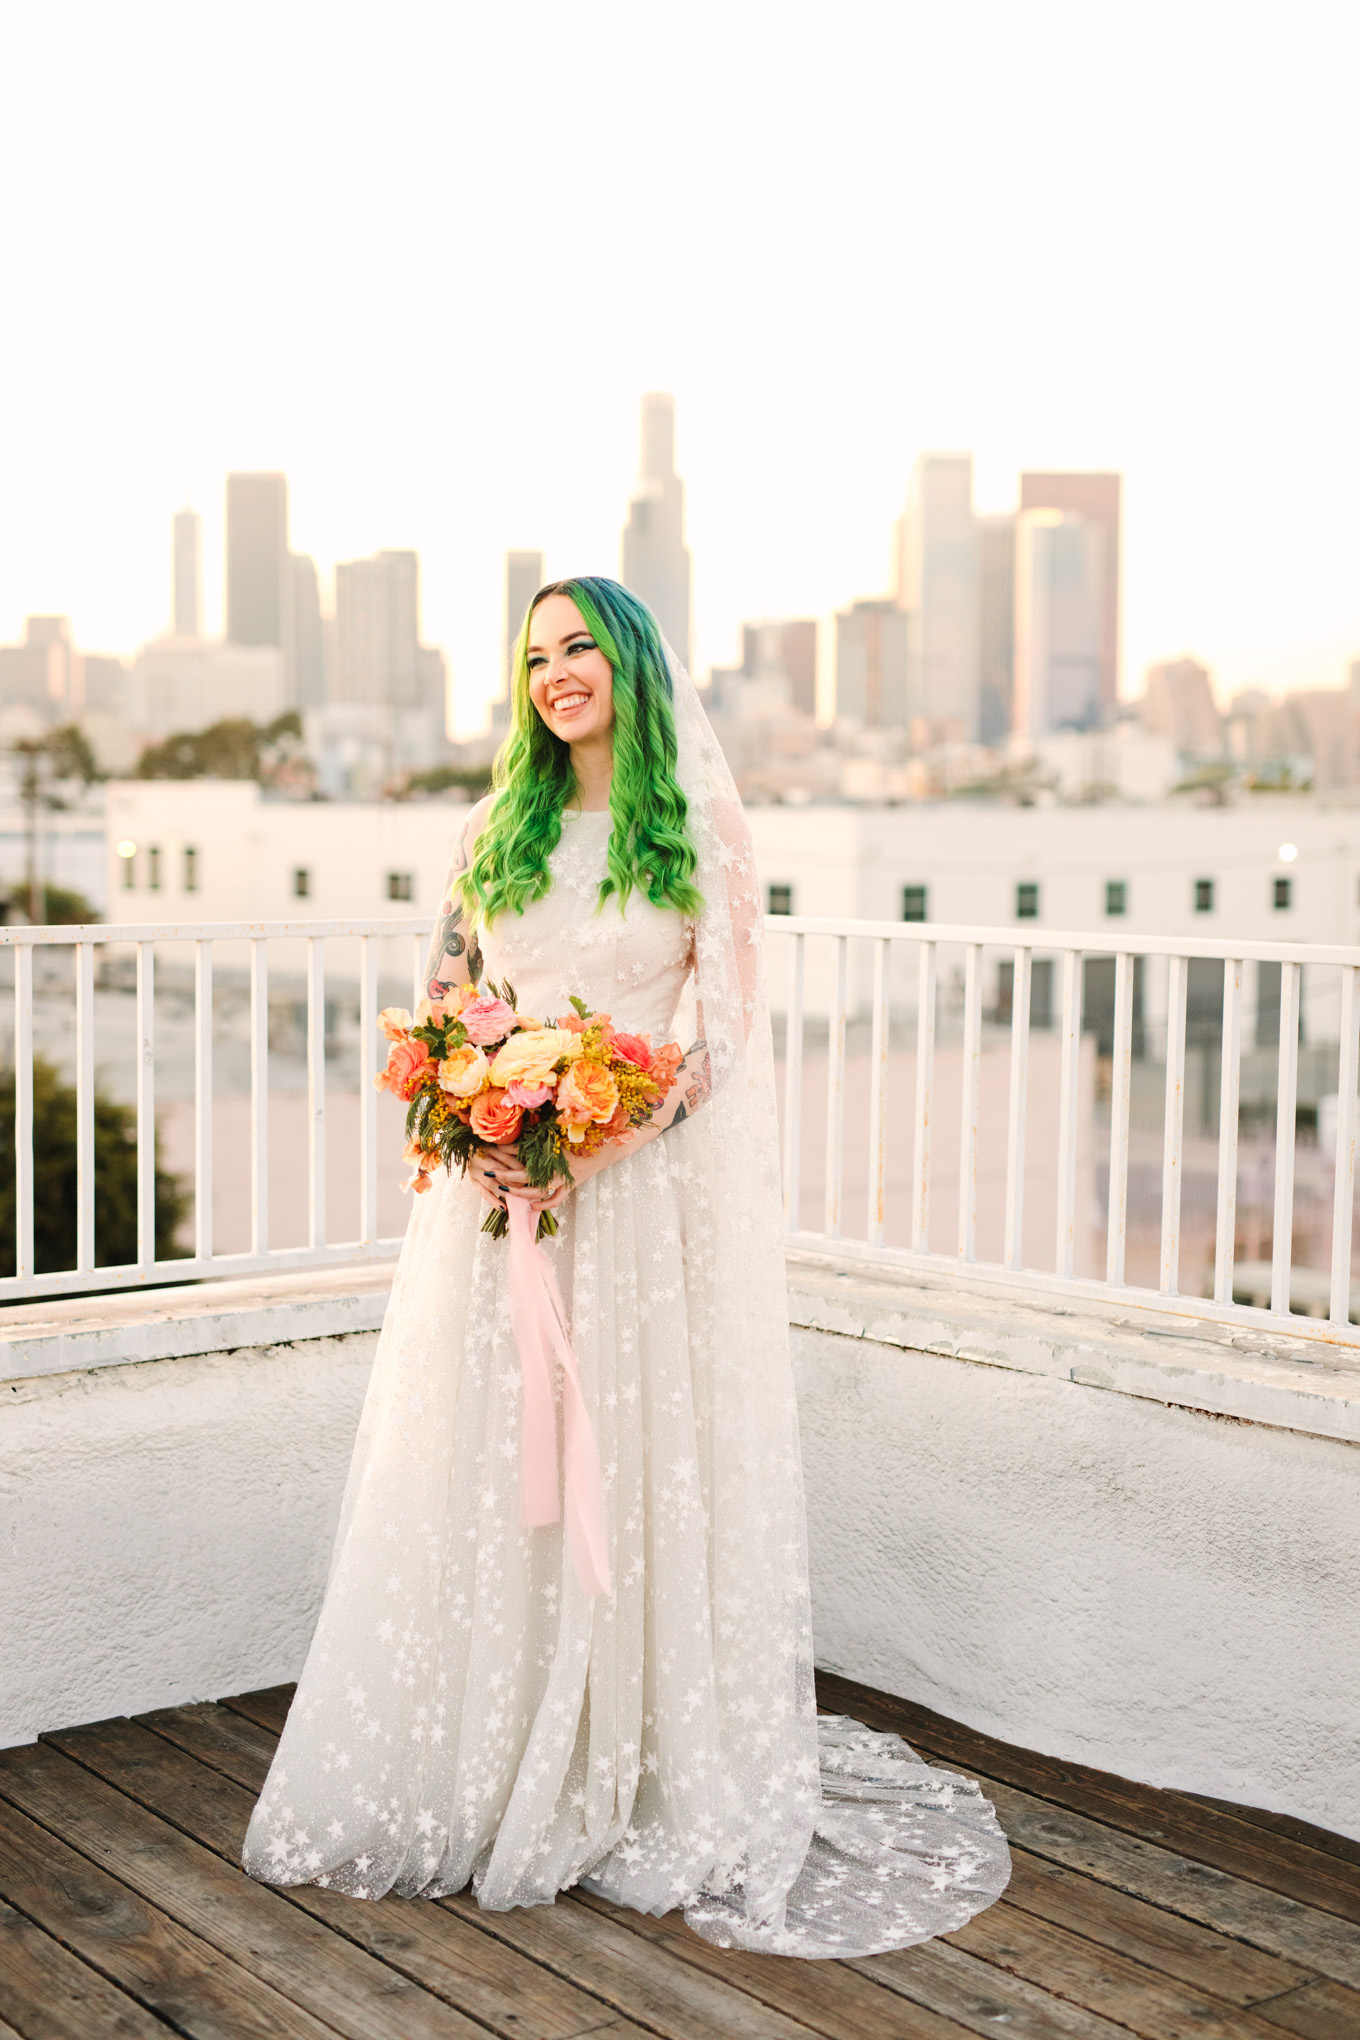 Portraits on rooftop with green hair bride in star gown | Colorful wedding at The Unique Space Los Angeles published in The Knot Magazine | Fresh and colorful photography for fun-loving couples in Southern California | #colorfulwedding #losangeleswedding #weddingphotography #uniquespace Source: Mary Costa Photography | Los Angeles